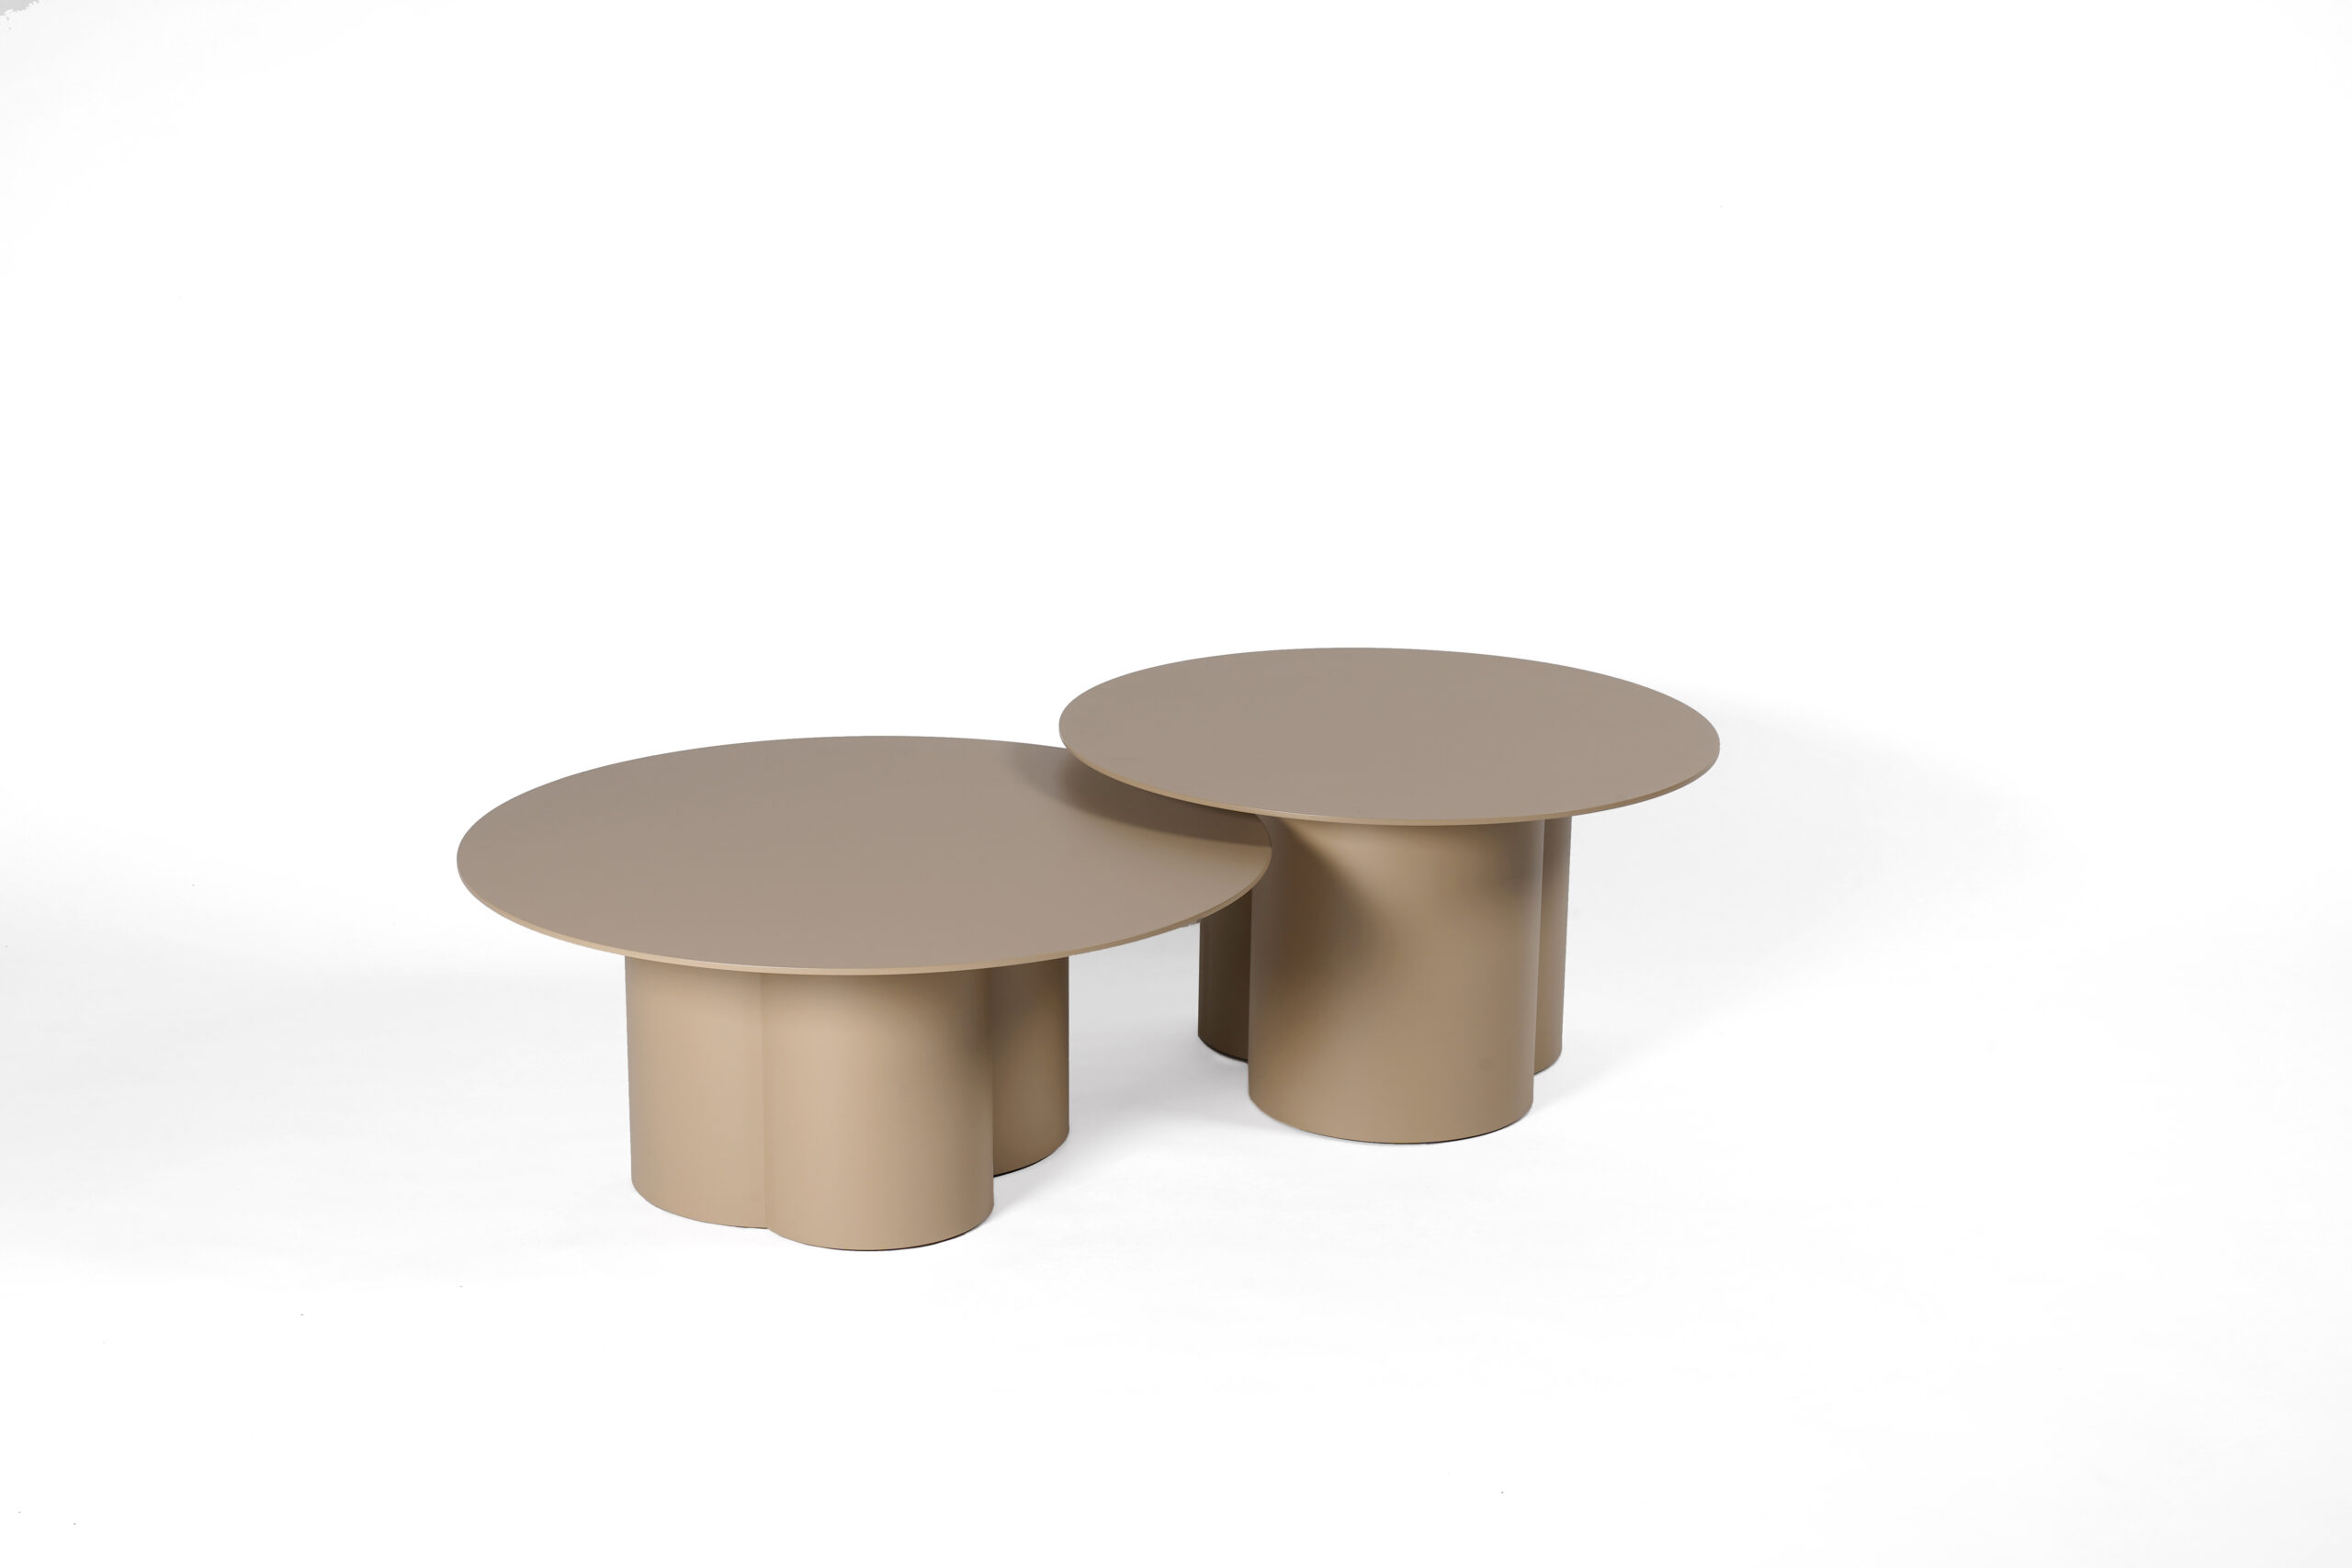 Rayons low table by Christophe de la Fontaine DANTE - Goods and Bads